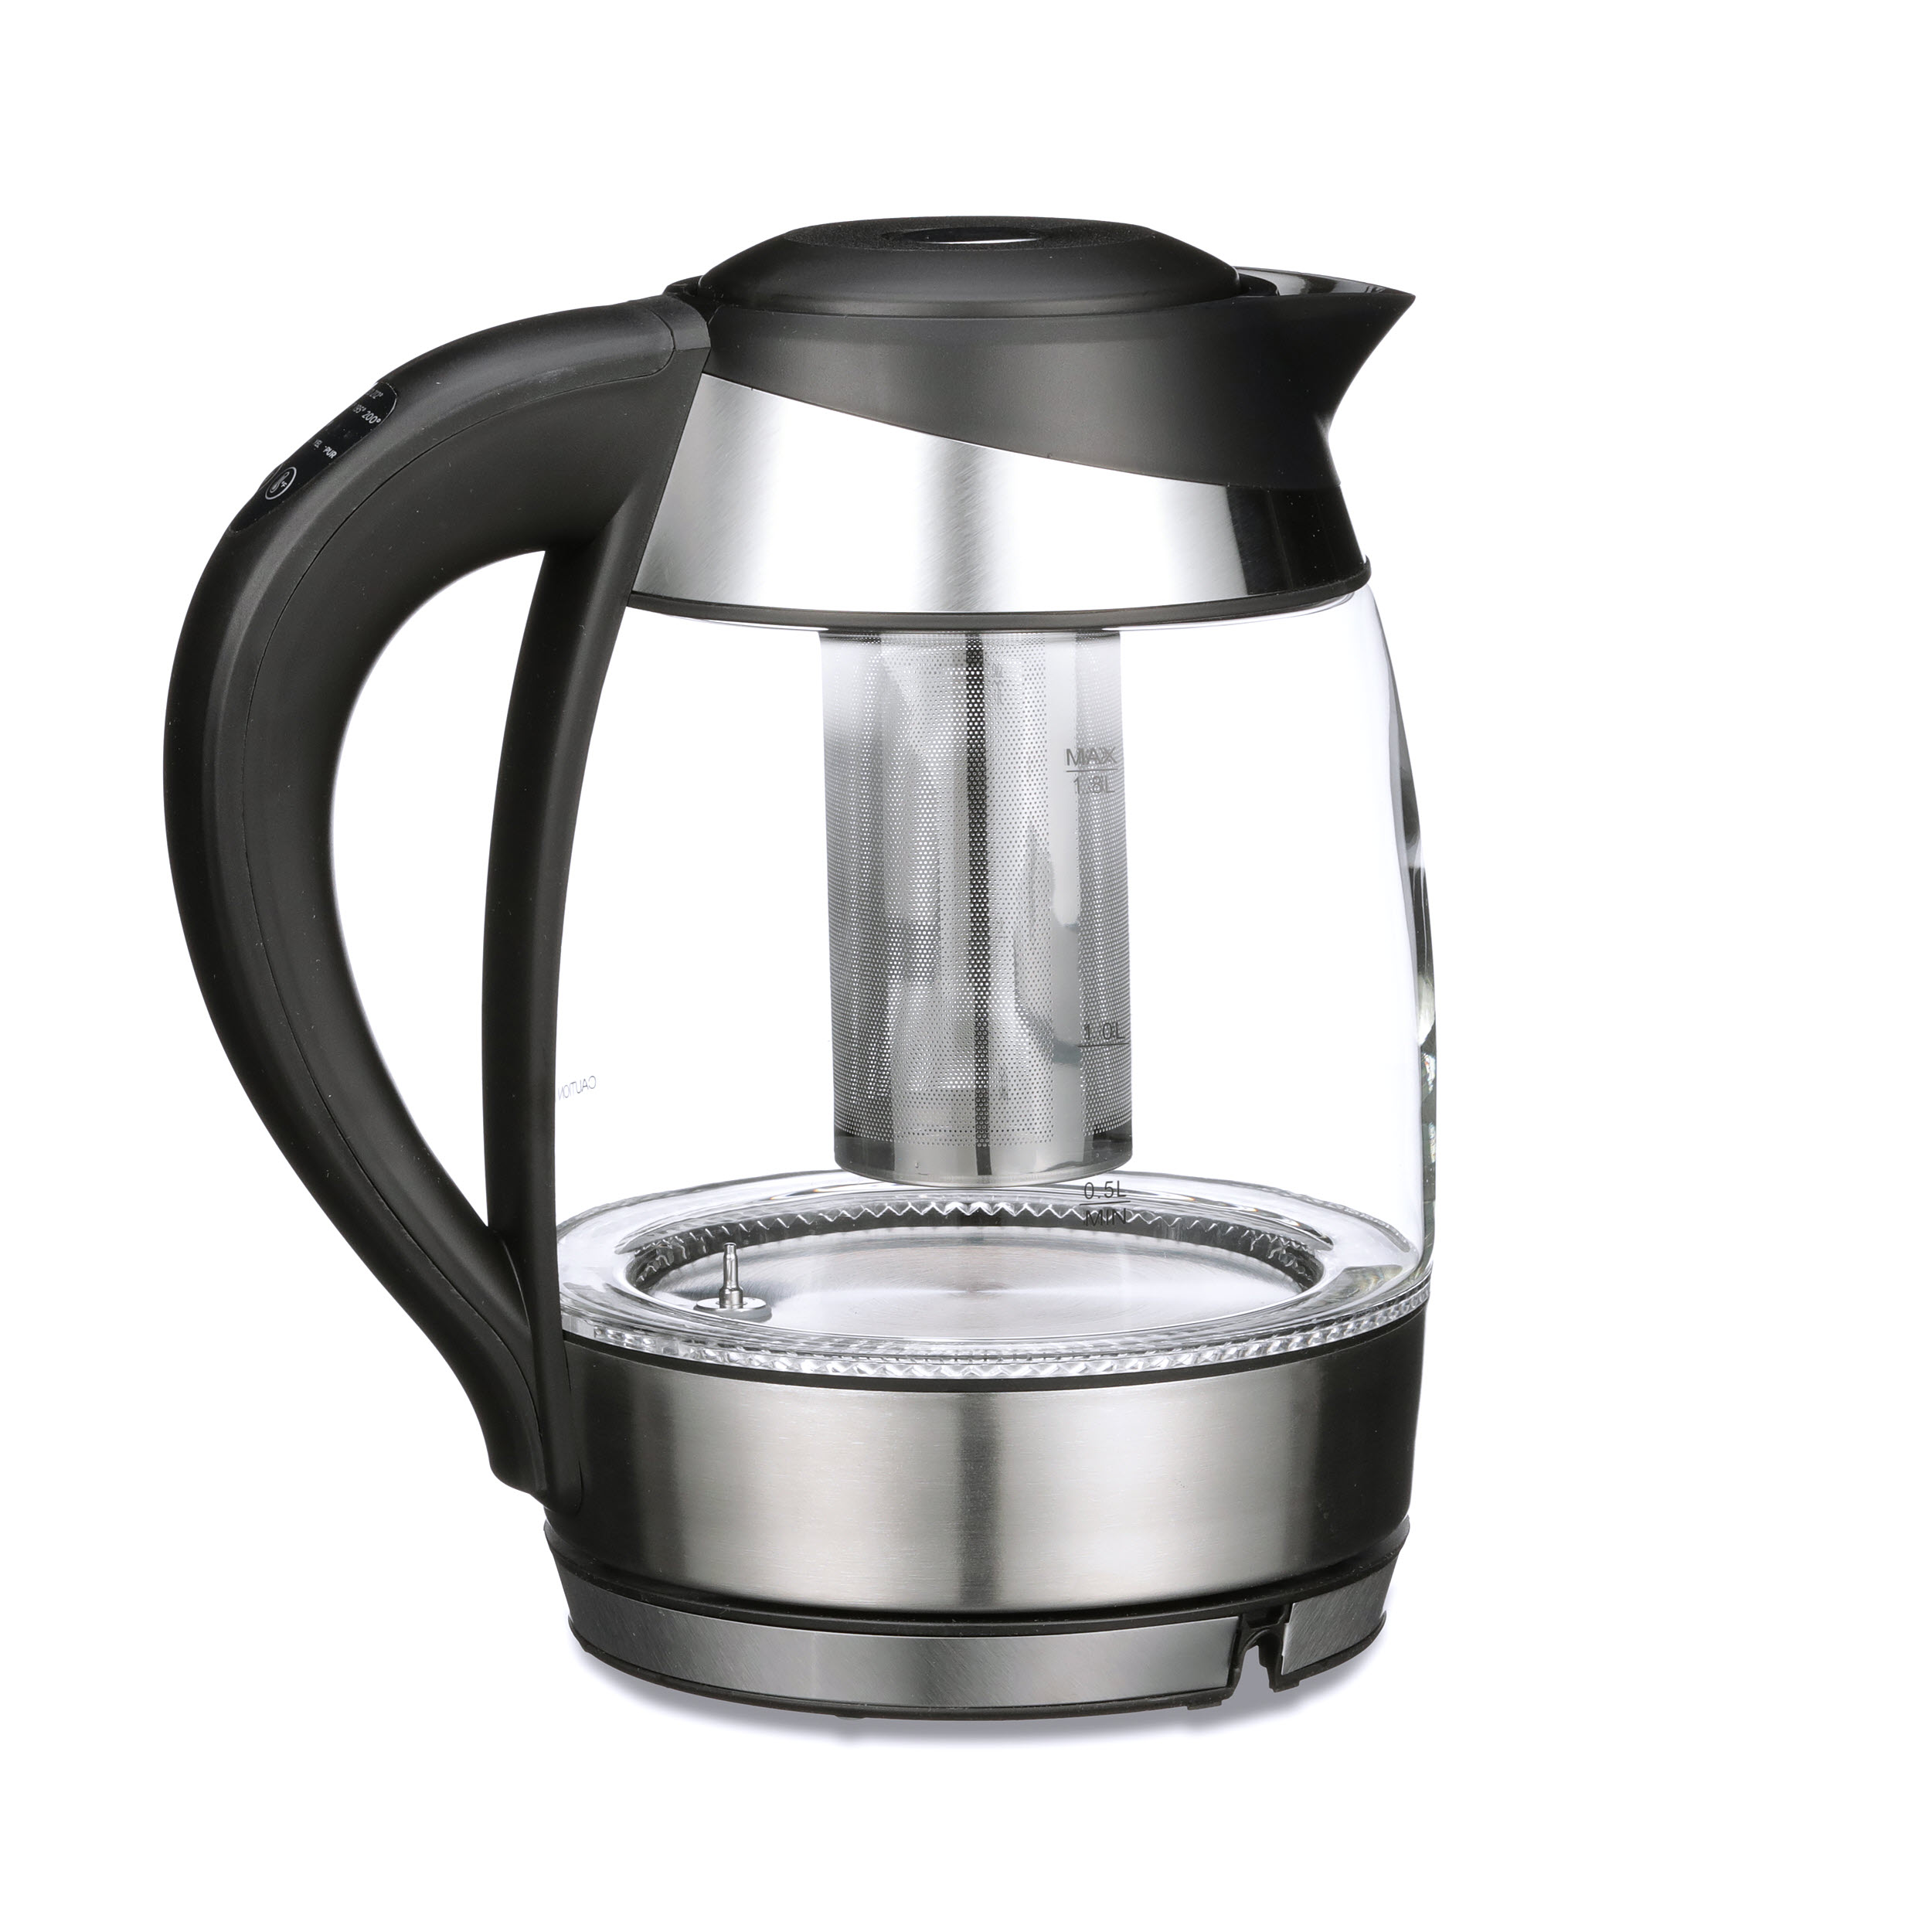 Chefman Electric Cordless Glass Tea Kettle with FREE Included Tea Infuser  LED Lighting Perfect Steep and Auto-Shutoff Safety Feature 1.8 Liter/1.9  Quart - RJ11-17-TI 